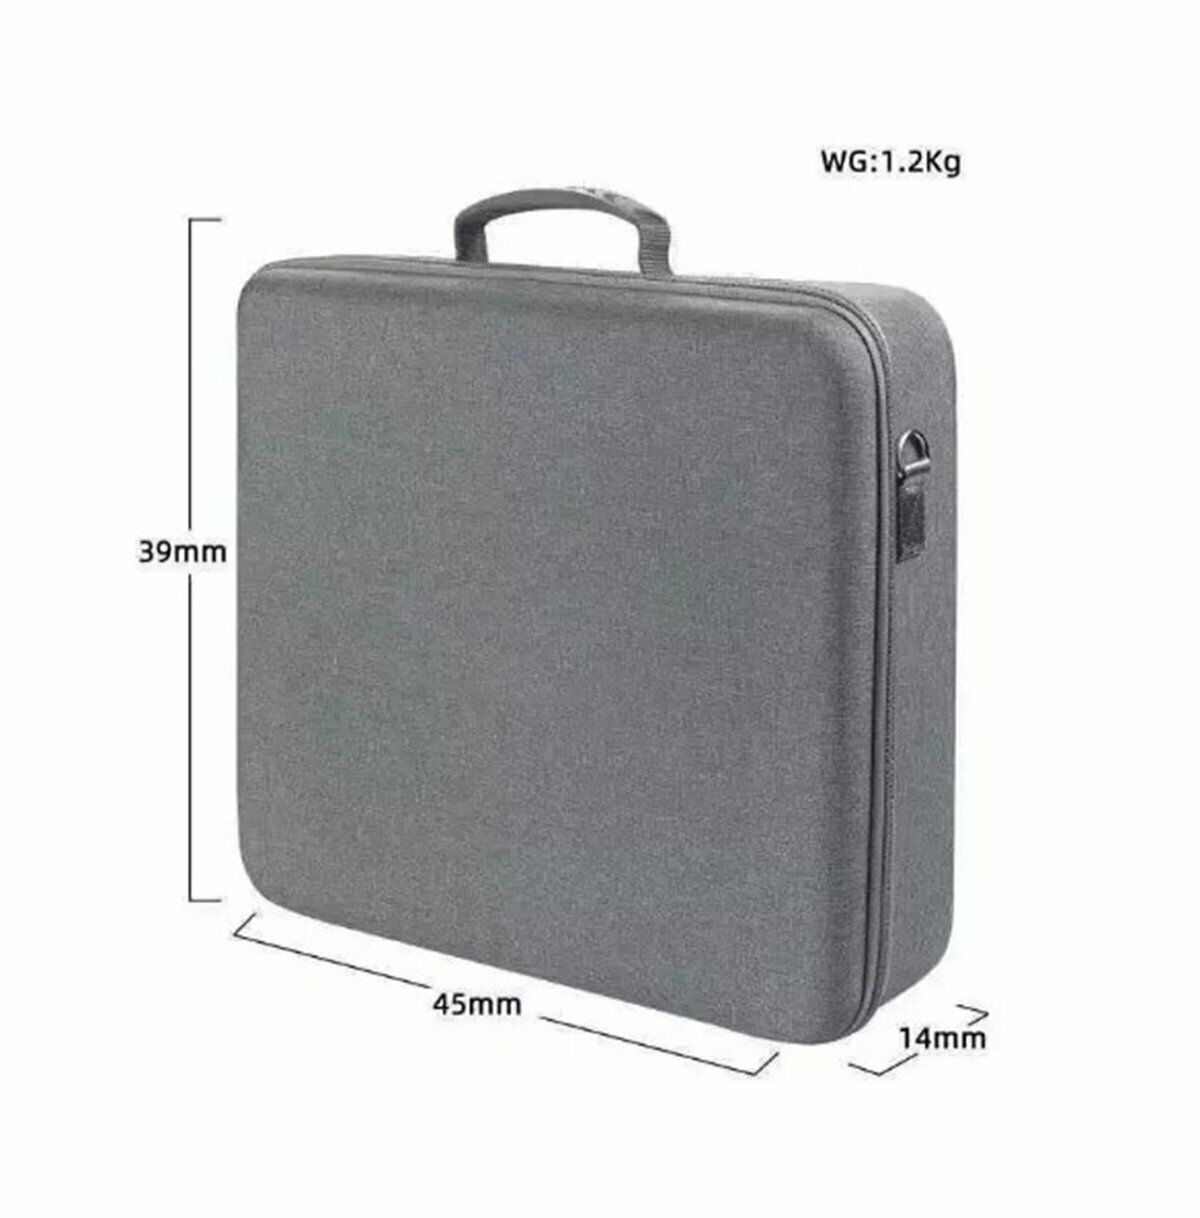 Carrying Case Shockproof Travel Storage EVA Bag for Playstation 5 PS5 Box Gray